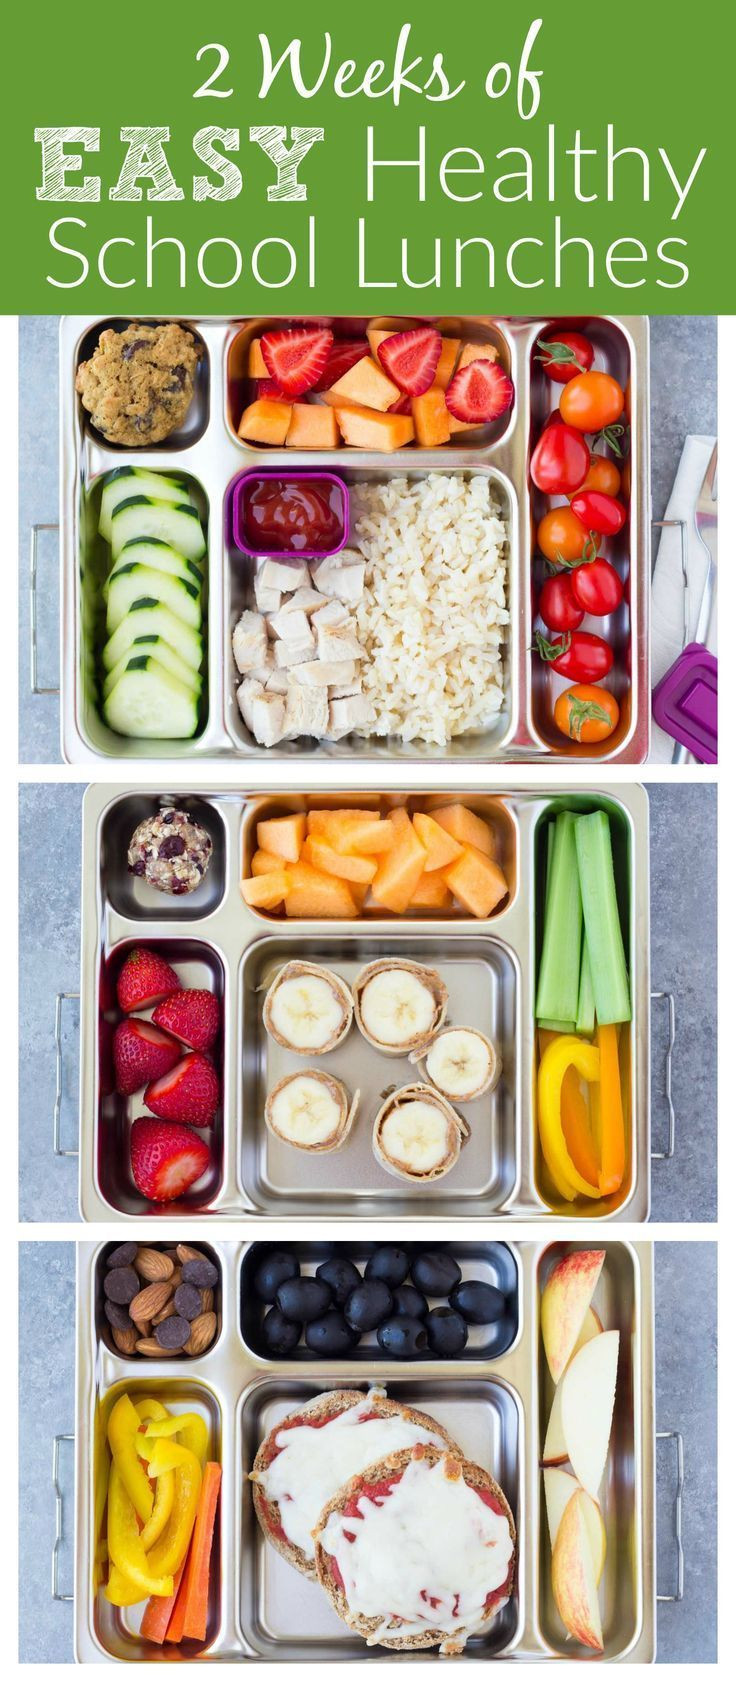 Easy Healthy School Lunches
 747 best images about Lunch Box Ideas on Pinterest